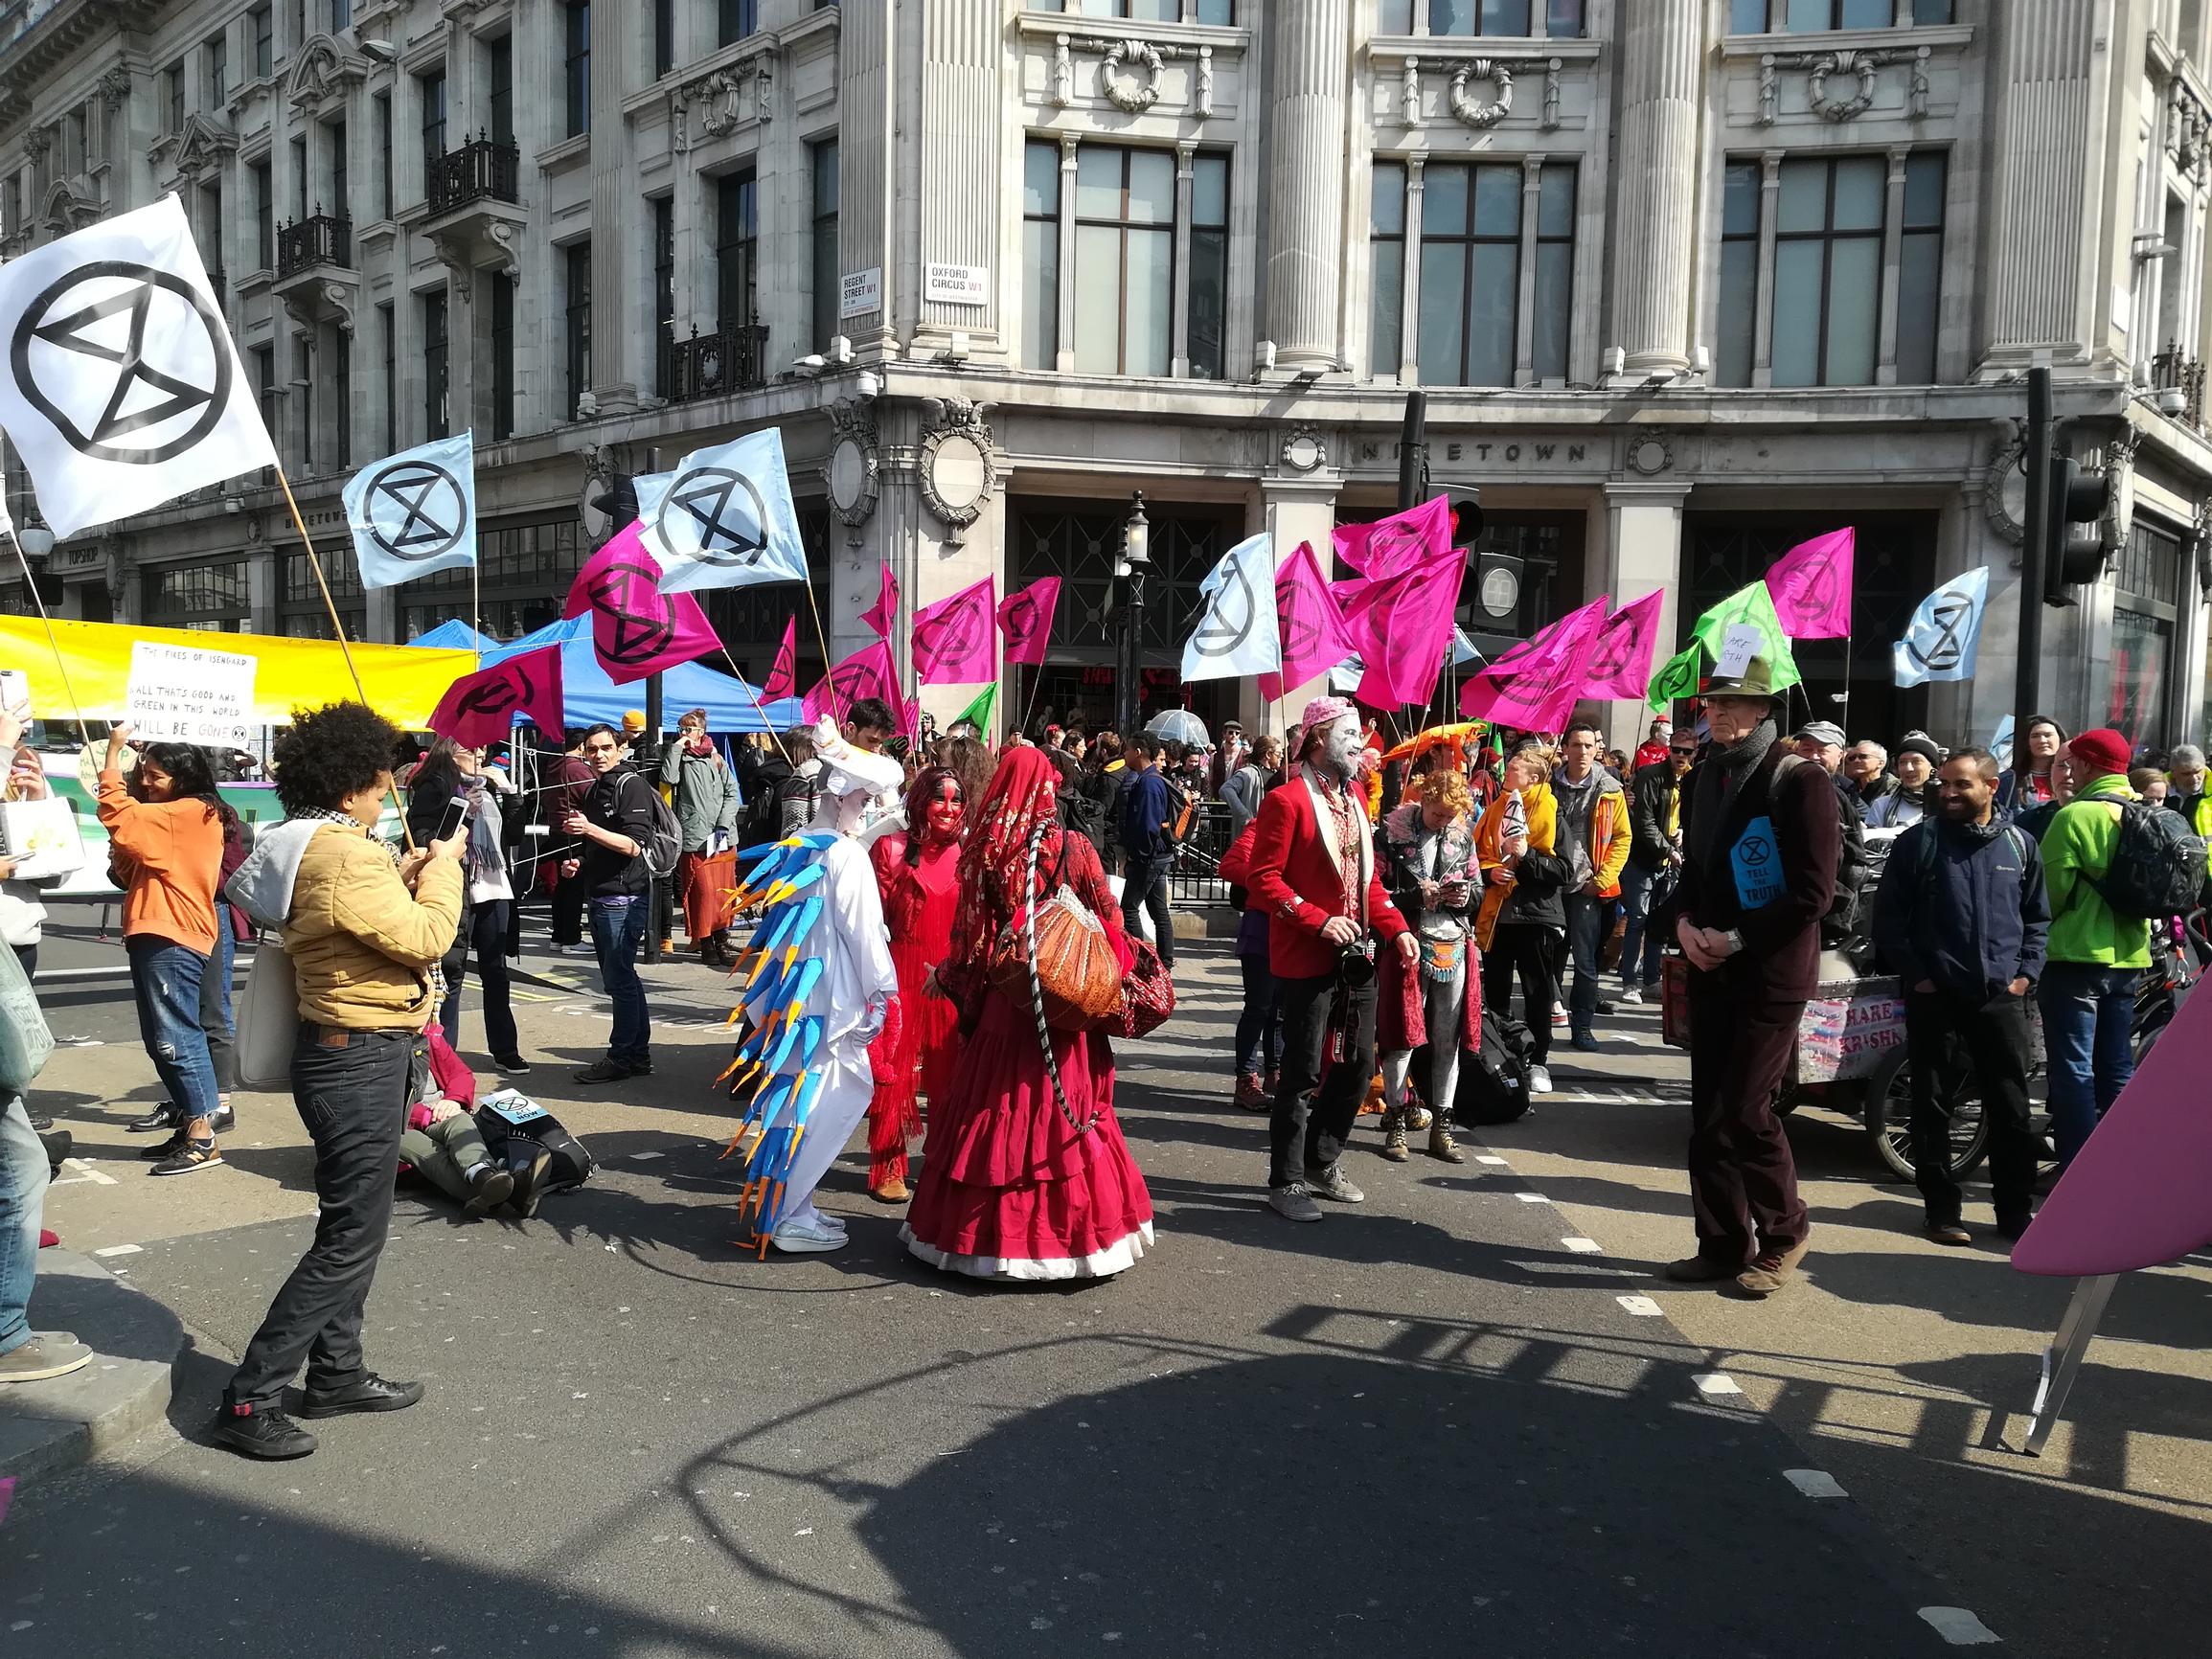 Can climate change protest movements such as Extinction Rebellion influence government policy?